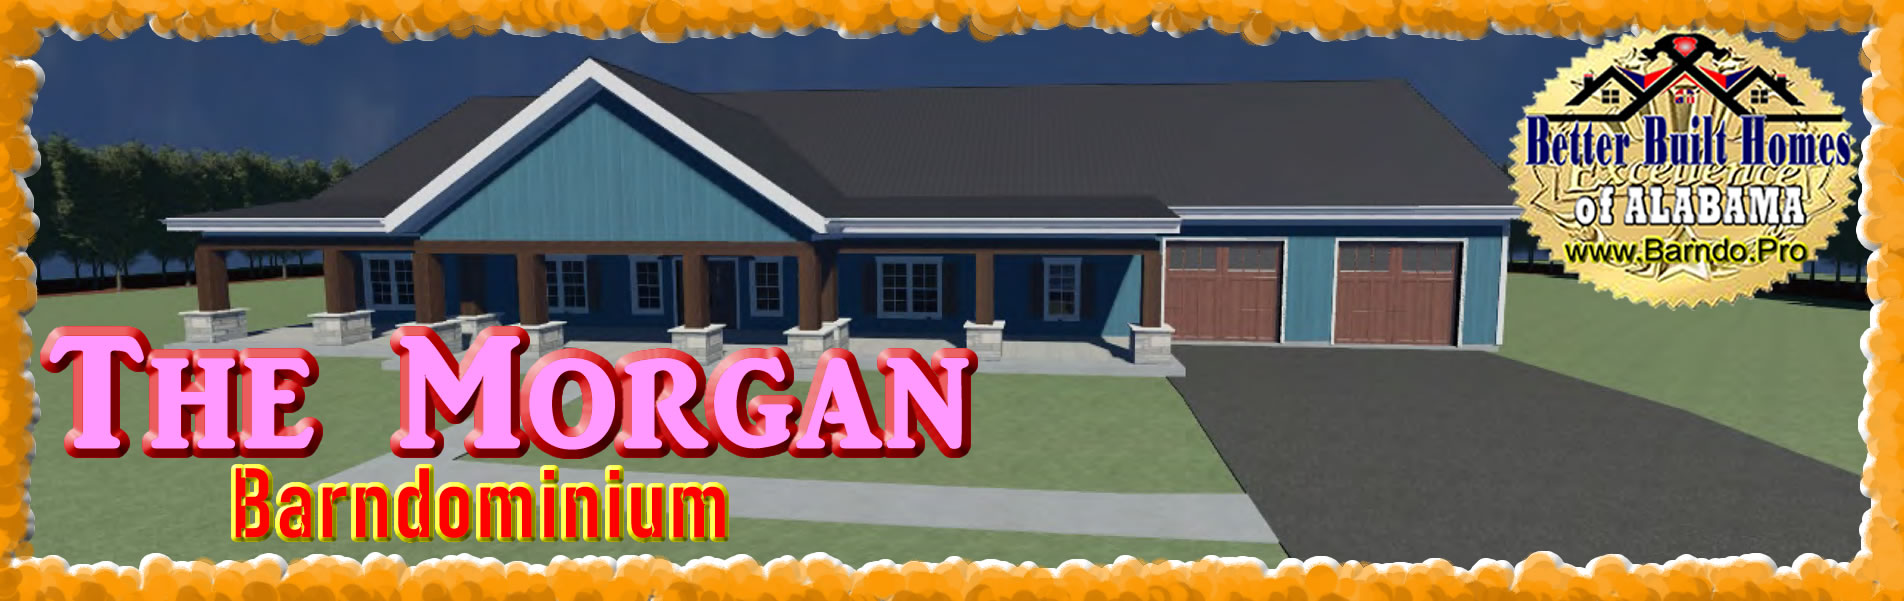 Click to View the Morgan Barndominium Floor Plans and images Contact us for more info.